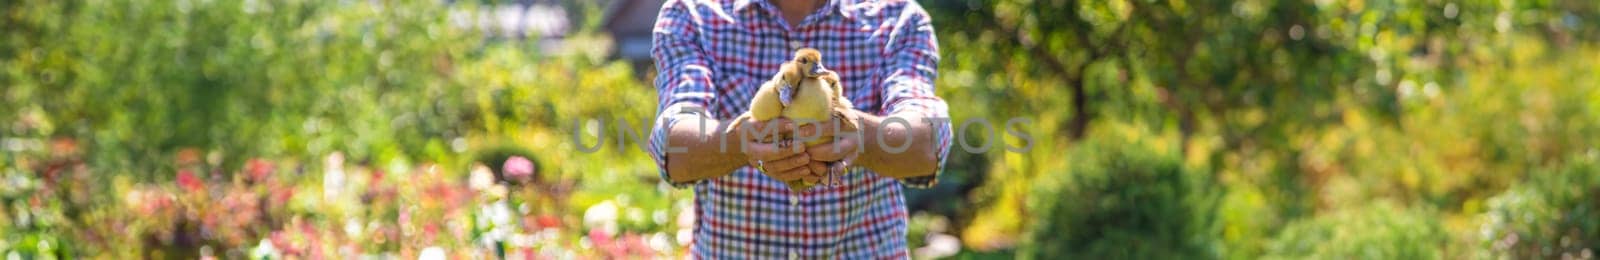 The farmer holds ducklings in his hands. Selective focus. by yanadjana